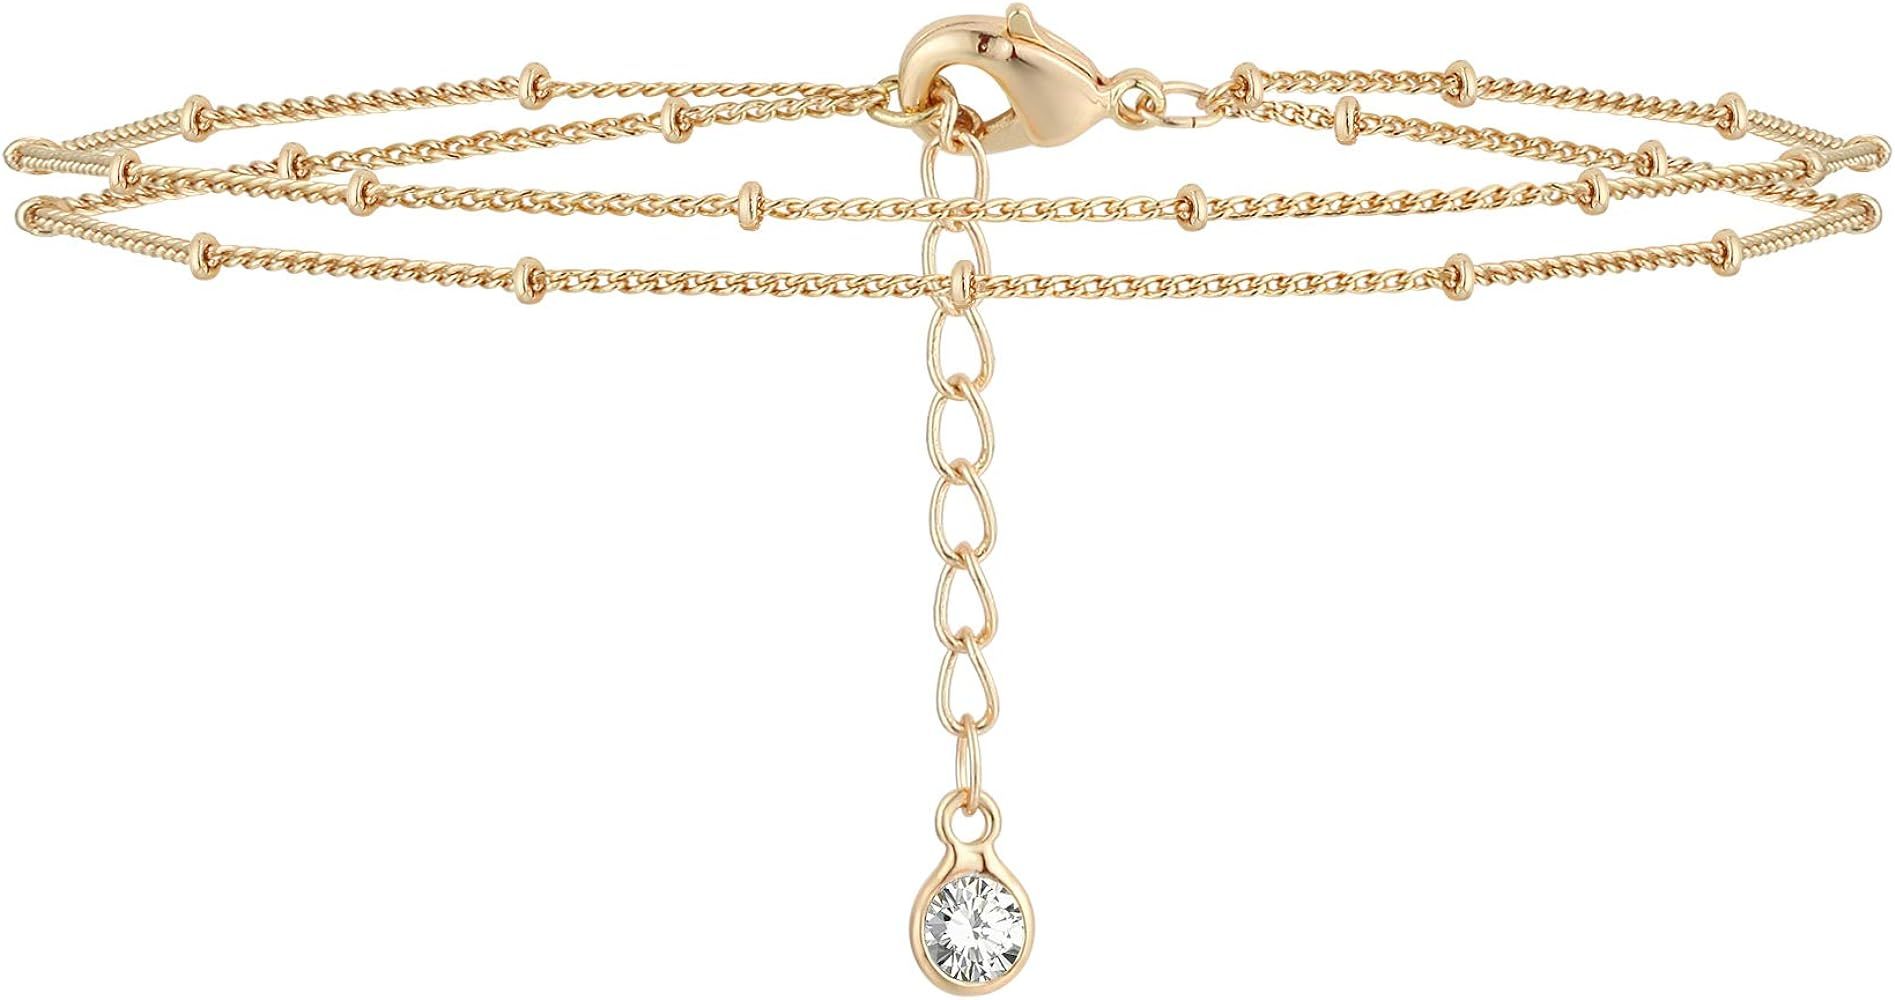 MEVECCO Gold Tiny Pearl Bracelet,14K Gold Plated Cute Beaded Freshwater Cultured Pearls Tiny Charm D | Amazon (US)